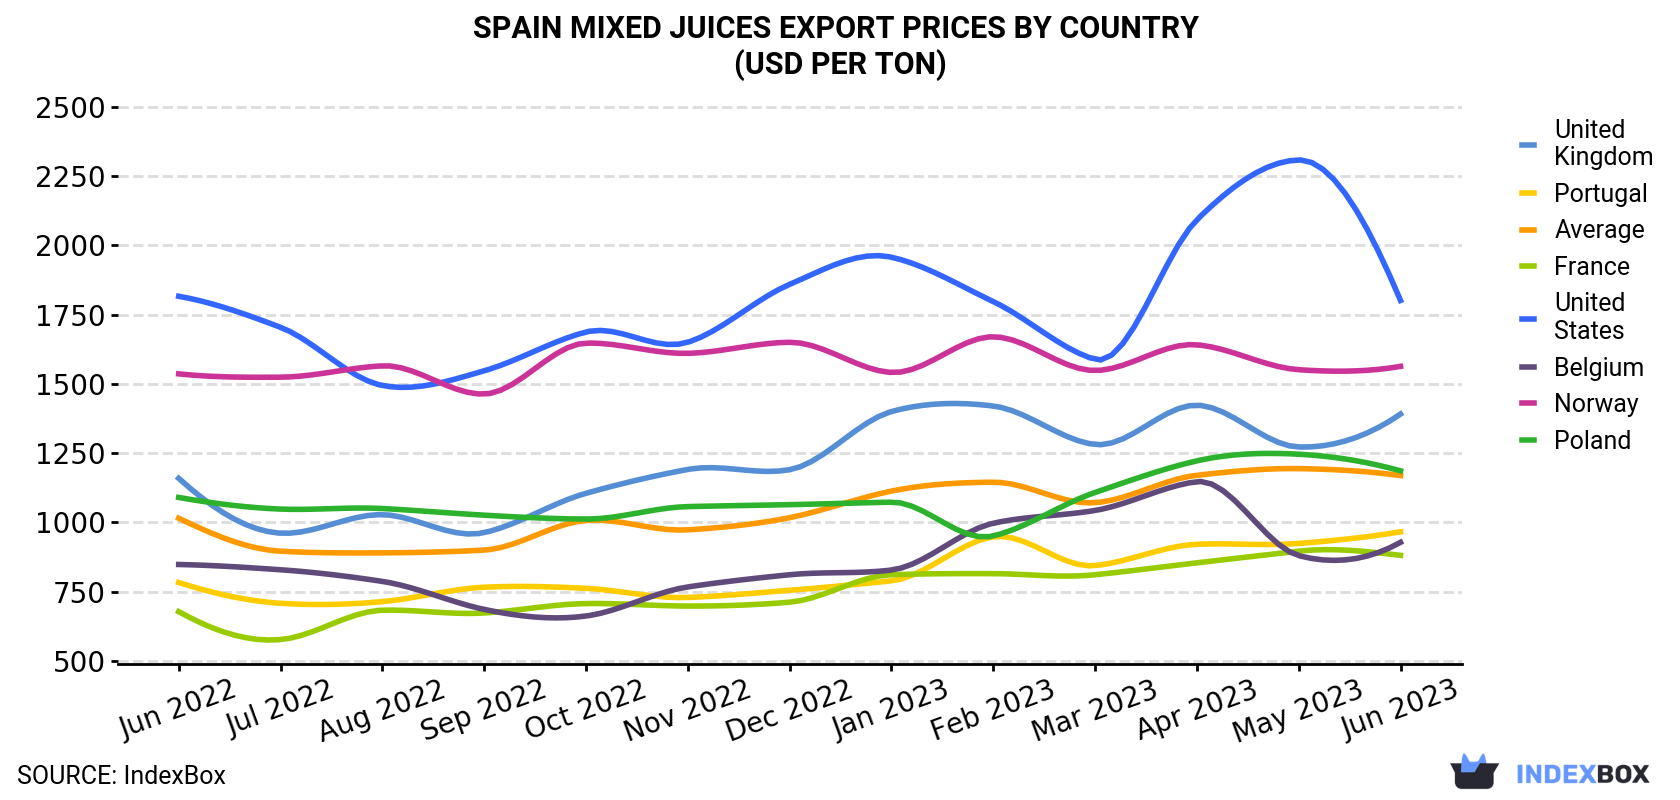 Spain Mixed Juices Export Prices By Country (USD Per Ton)